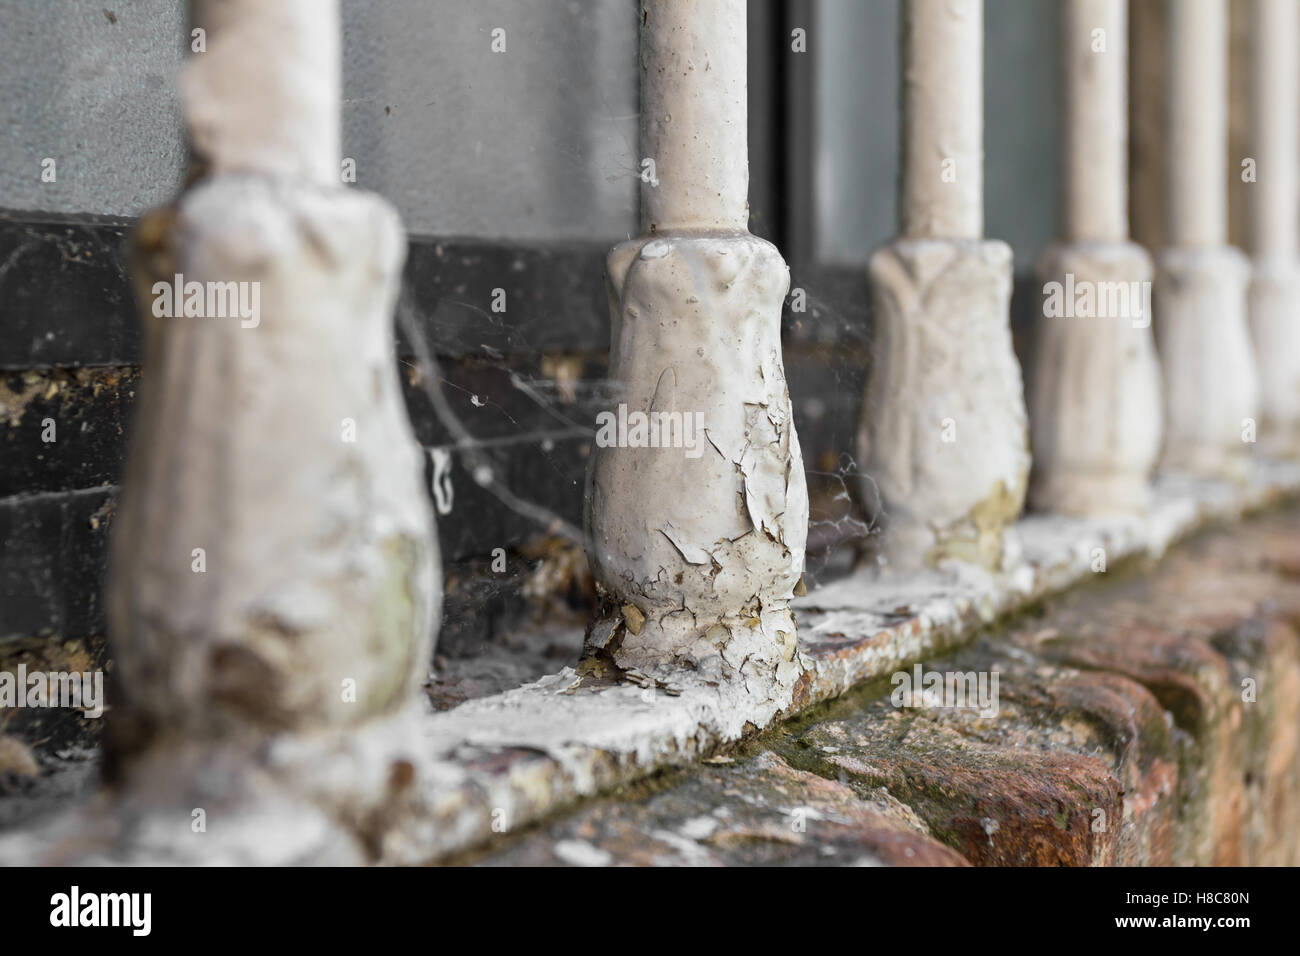 Closeup of old window bars with peeling paint, dirt and cobwebs. Stock Photo